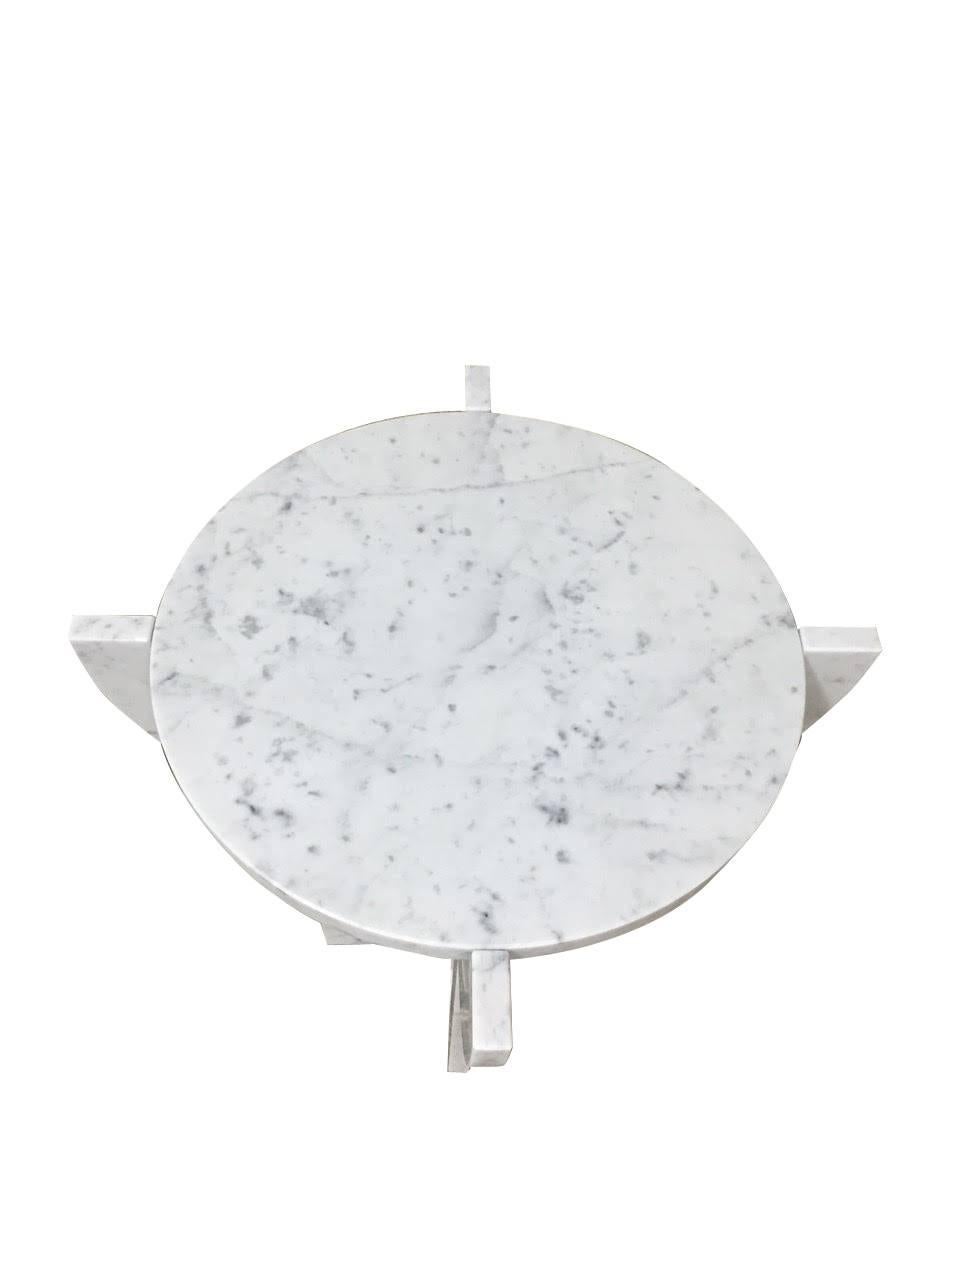 Italian White Carrara Marble Cocktail Table, Contemporary For Sale 1